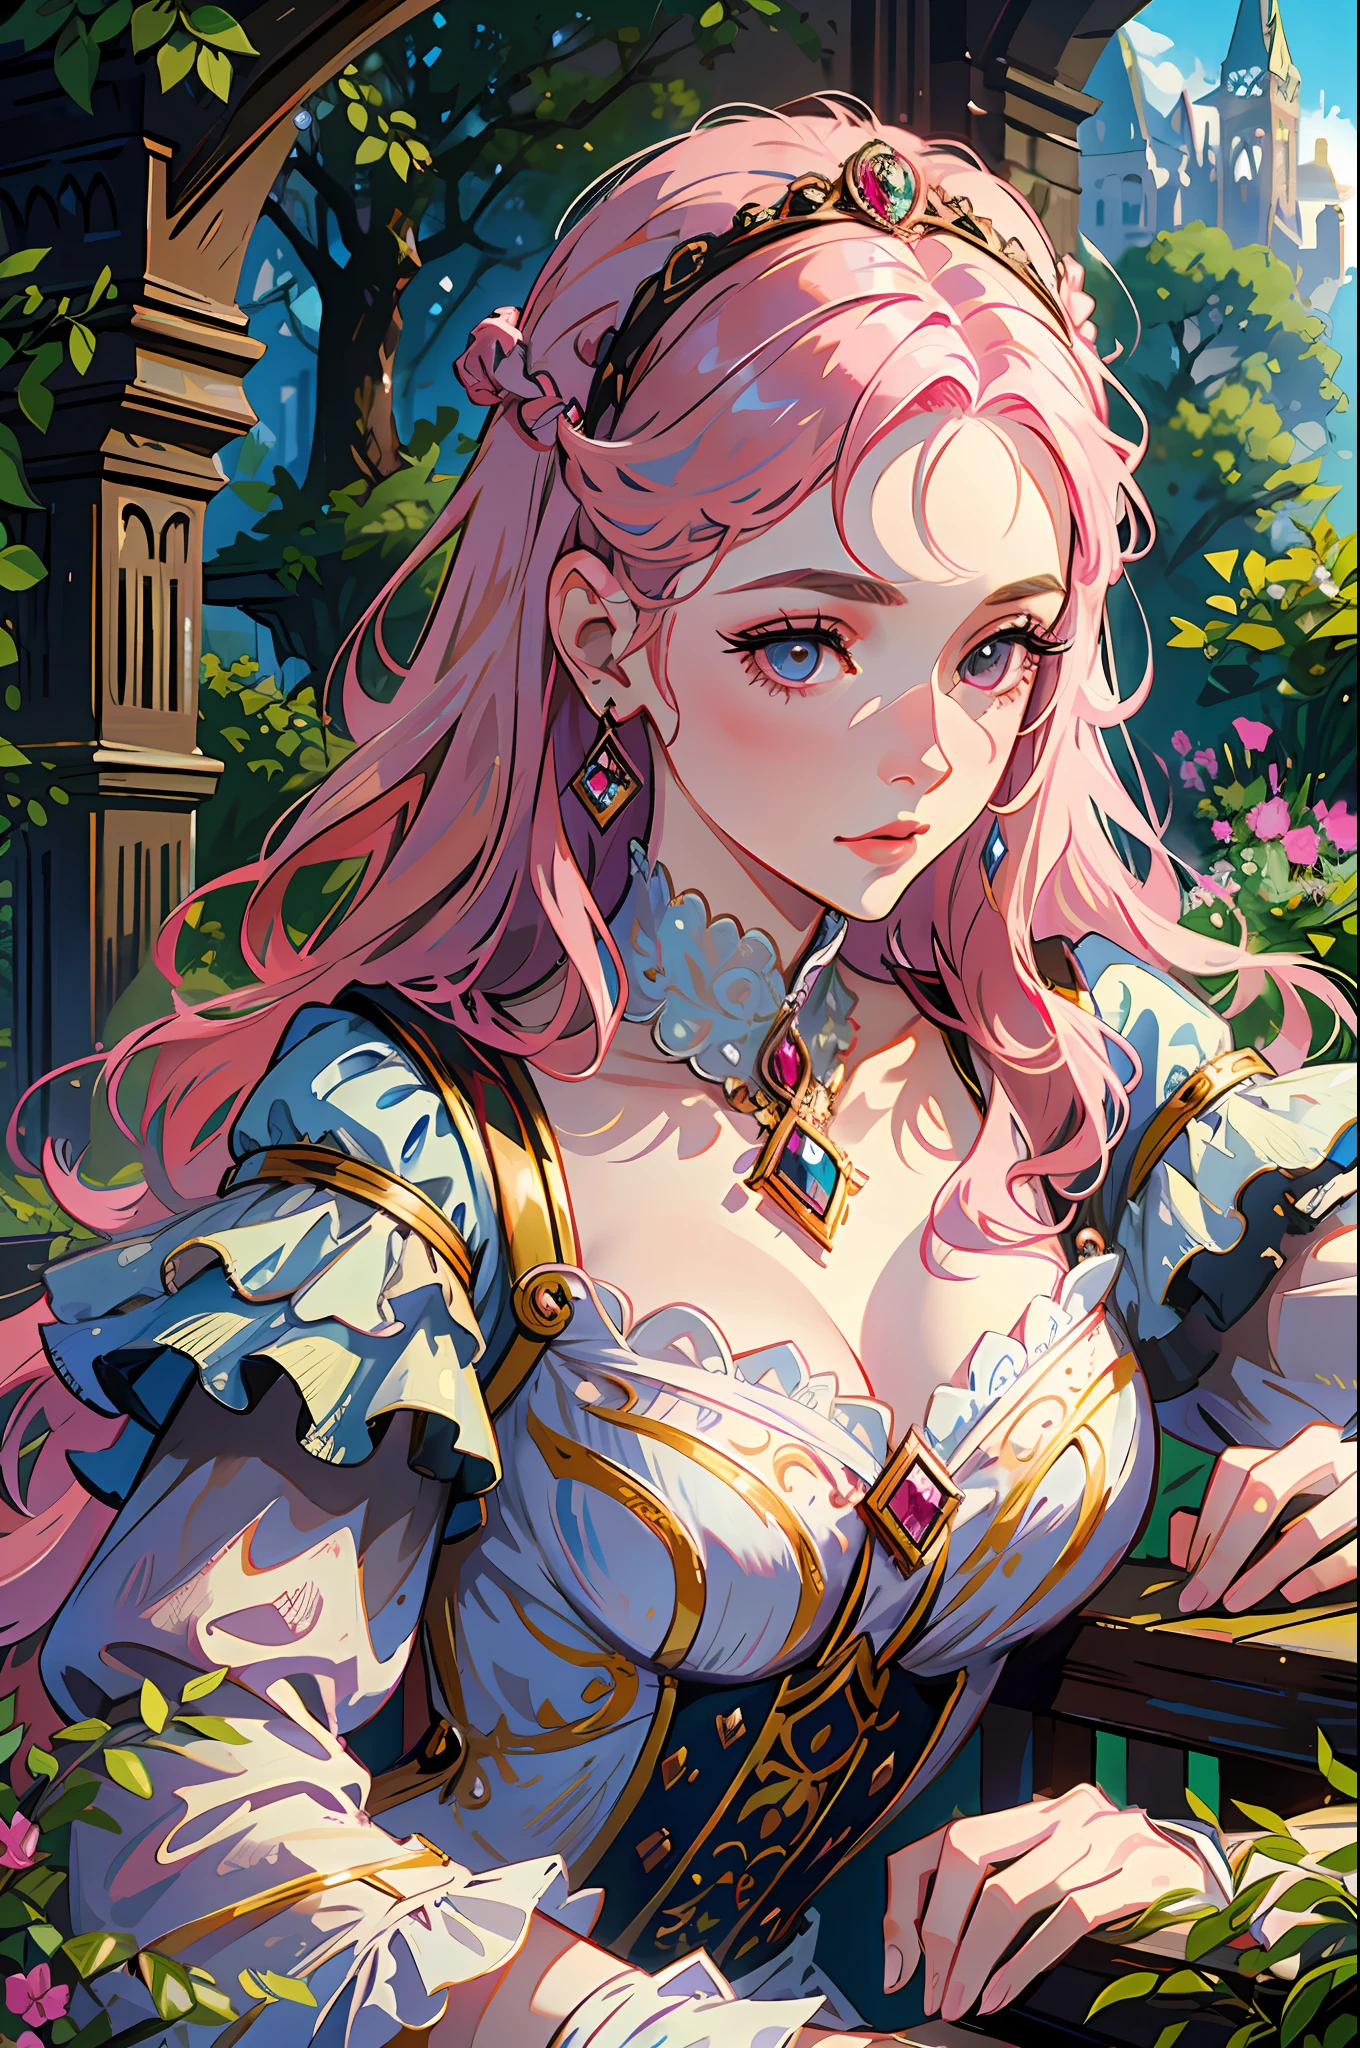 masterpiece, best quality, 1woman, mature, adult, different fashion, different color, finely detailed eyes and detailed face, intricate details, happy, fantasy, 18th-century European aristocratic style, noble, garden, baroque, woman with pink hair, delicate